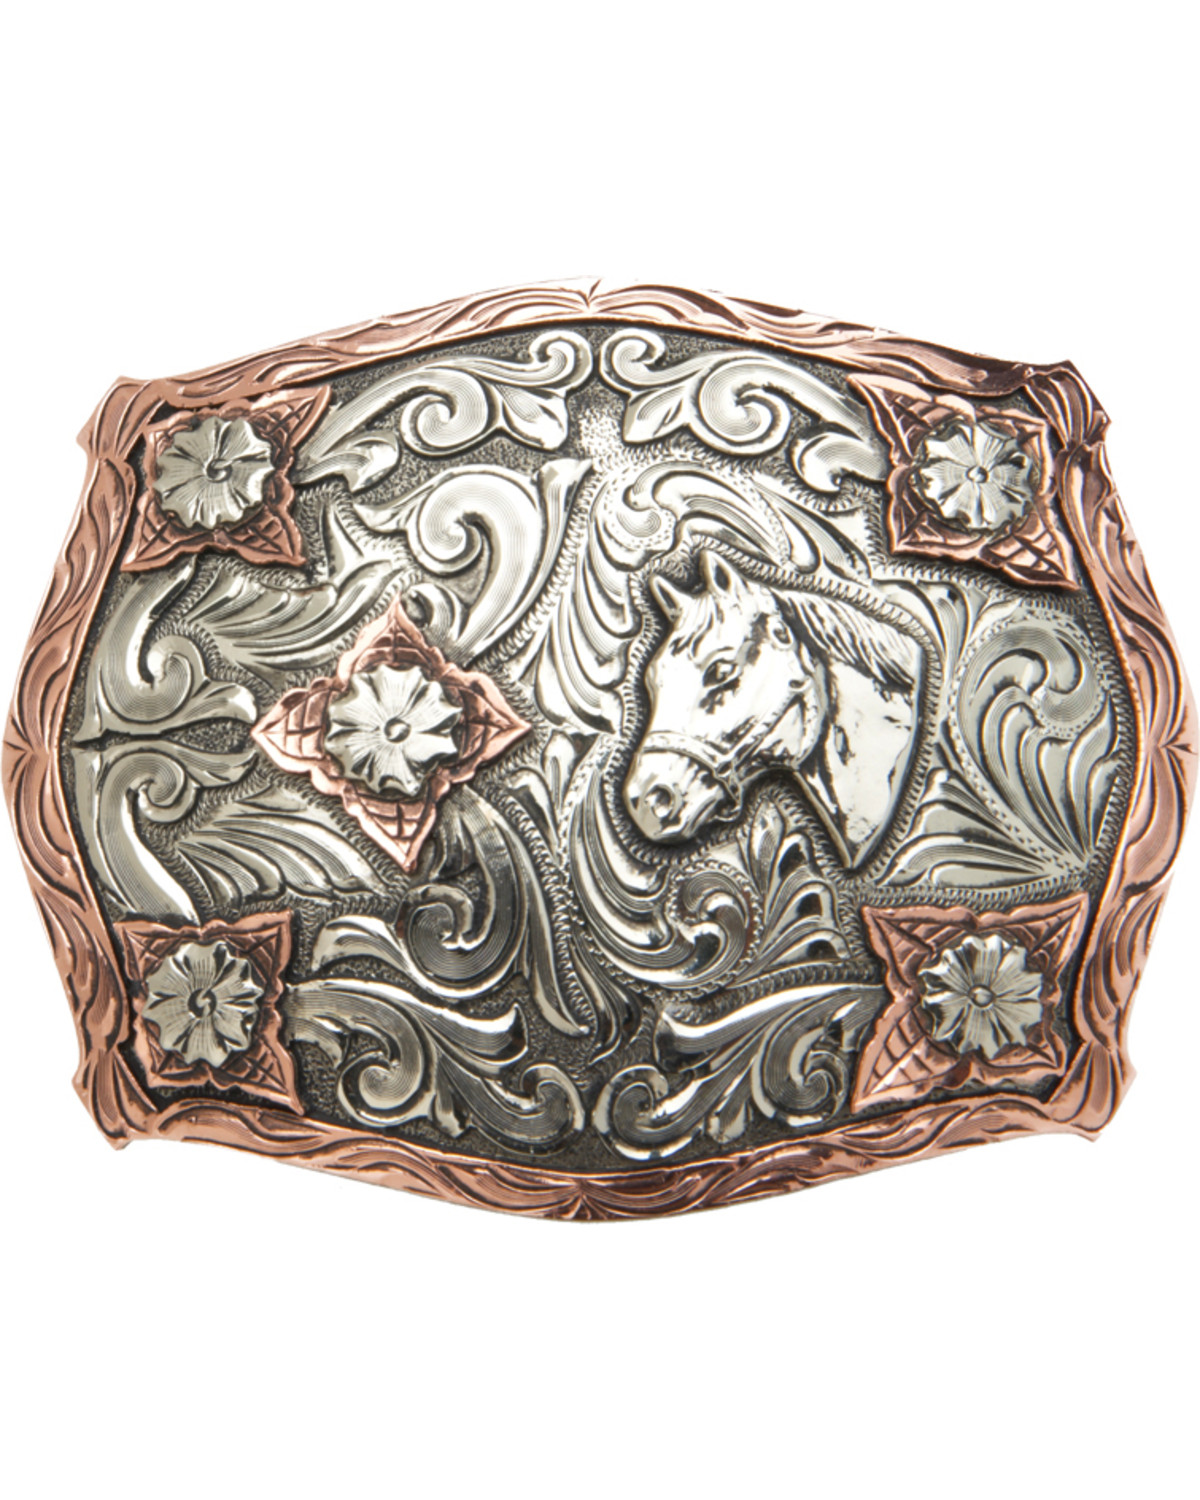 AndWest Vintage "Stanton" Two-Tone Horse Head Buckle